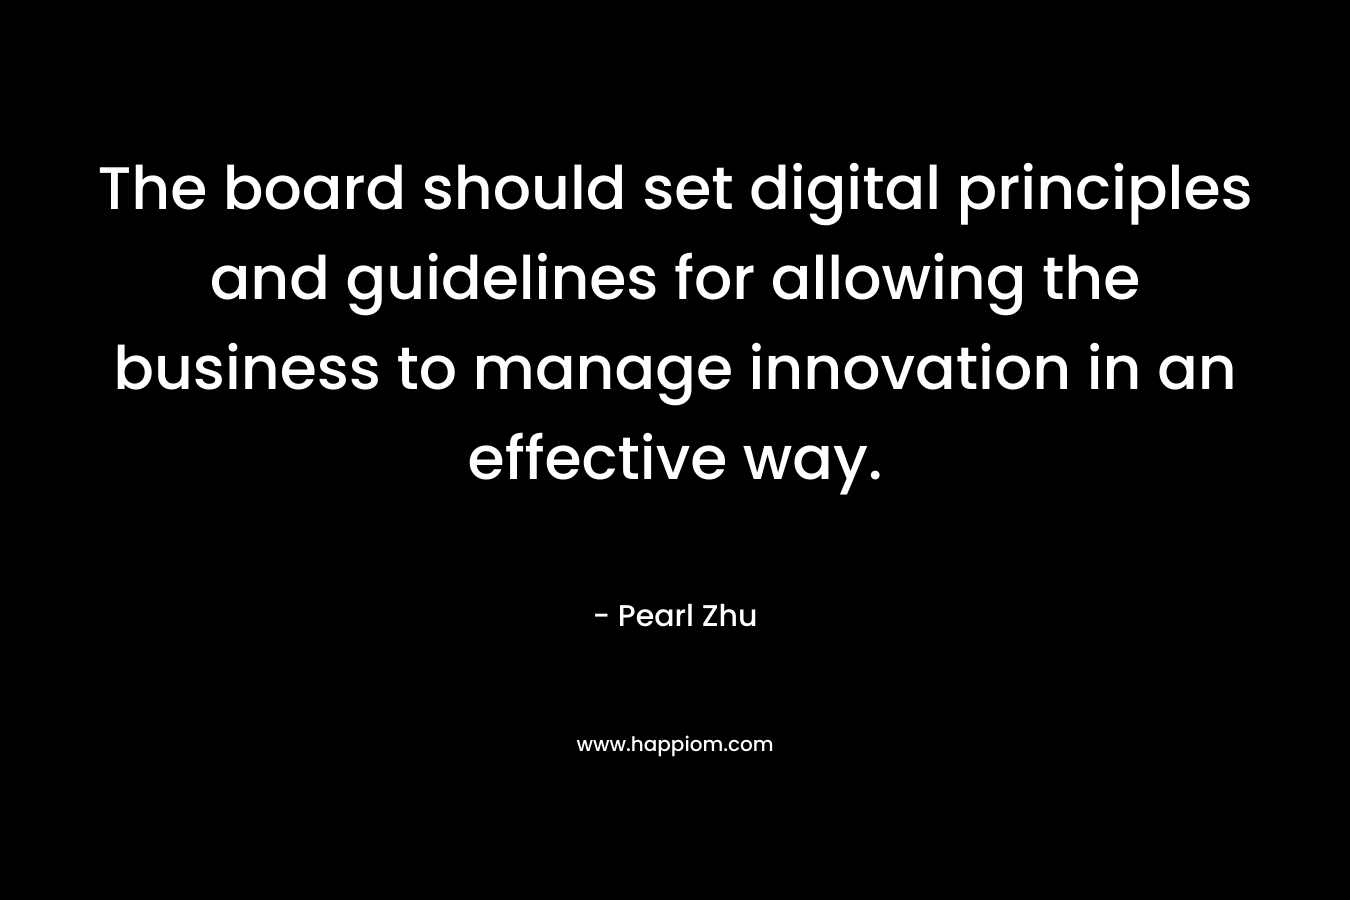 The board should set digital principles and guidelines for allowing the business to manage innovation in an effective way.